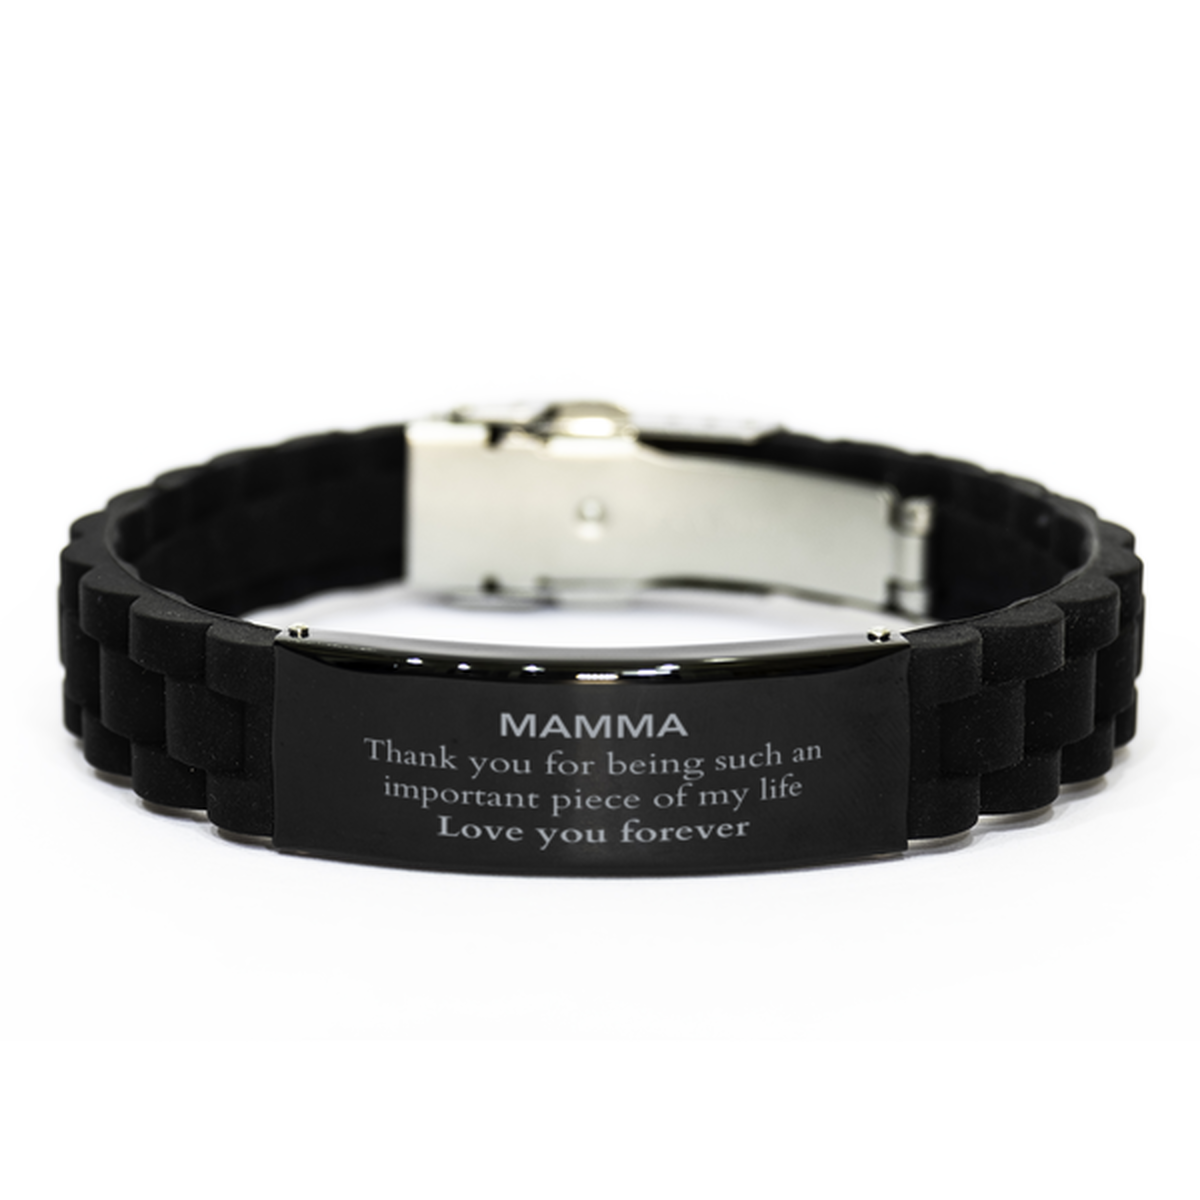 Appropriate Mamma Black Glidelock Clasp Bracelet Epic Birthday Gifts for Mamma Thank you for being such an important piece of my life Mamma Christmas Mothers Fathers Day